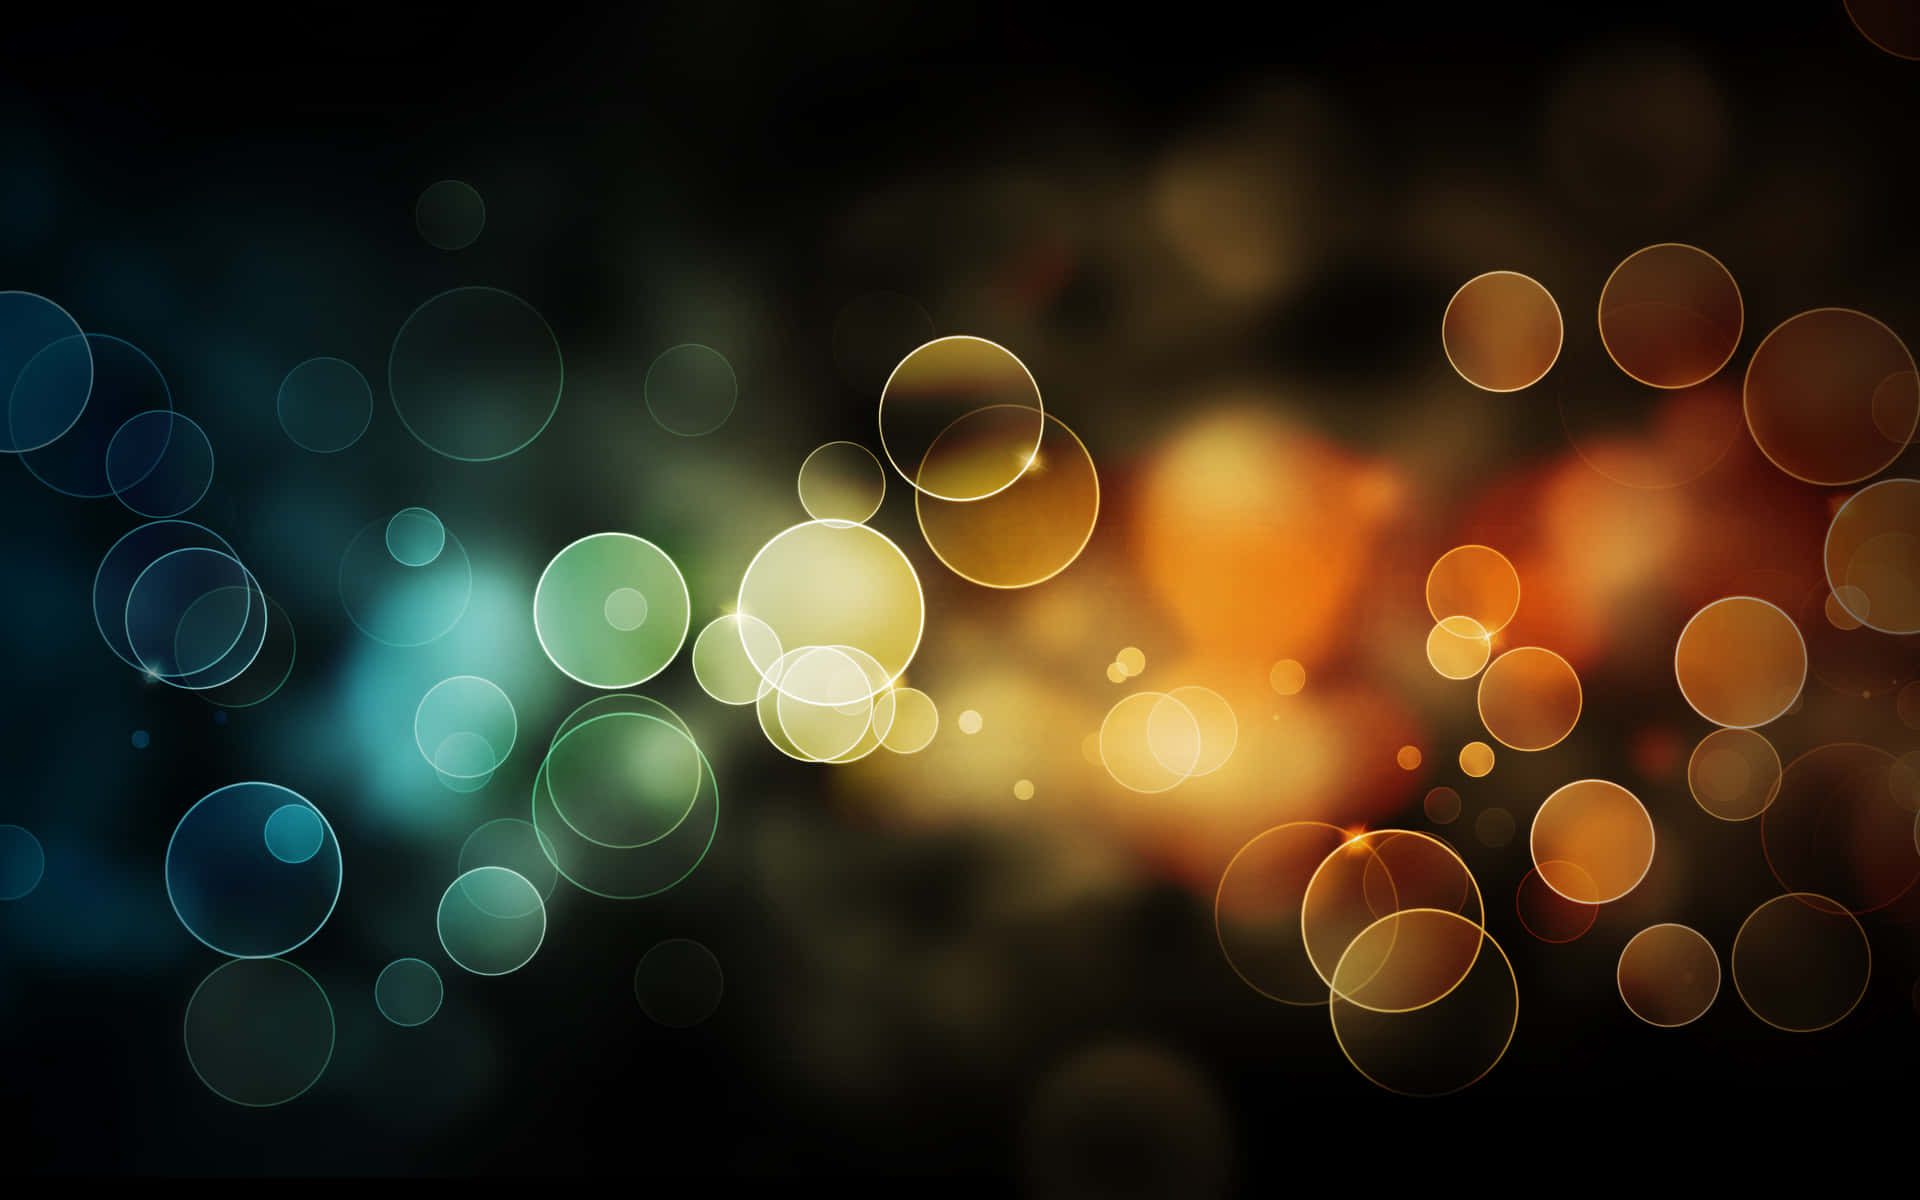 "Abstract Bokeh Background"